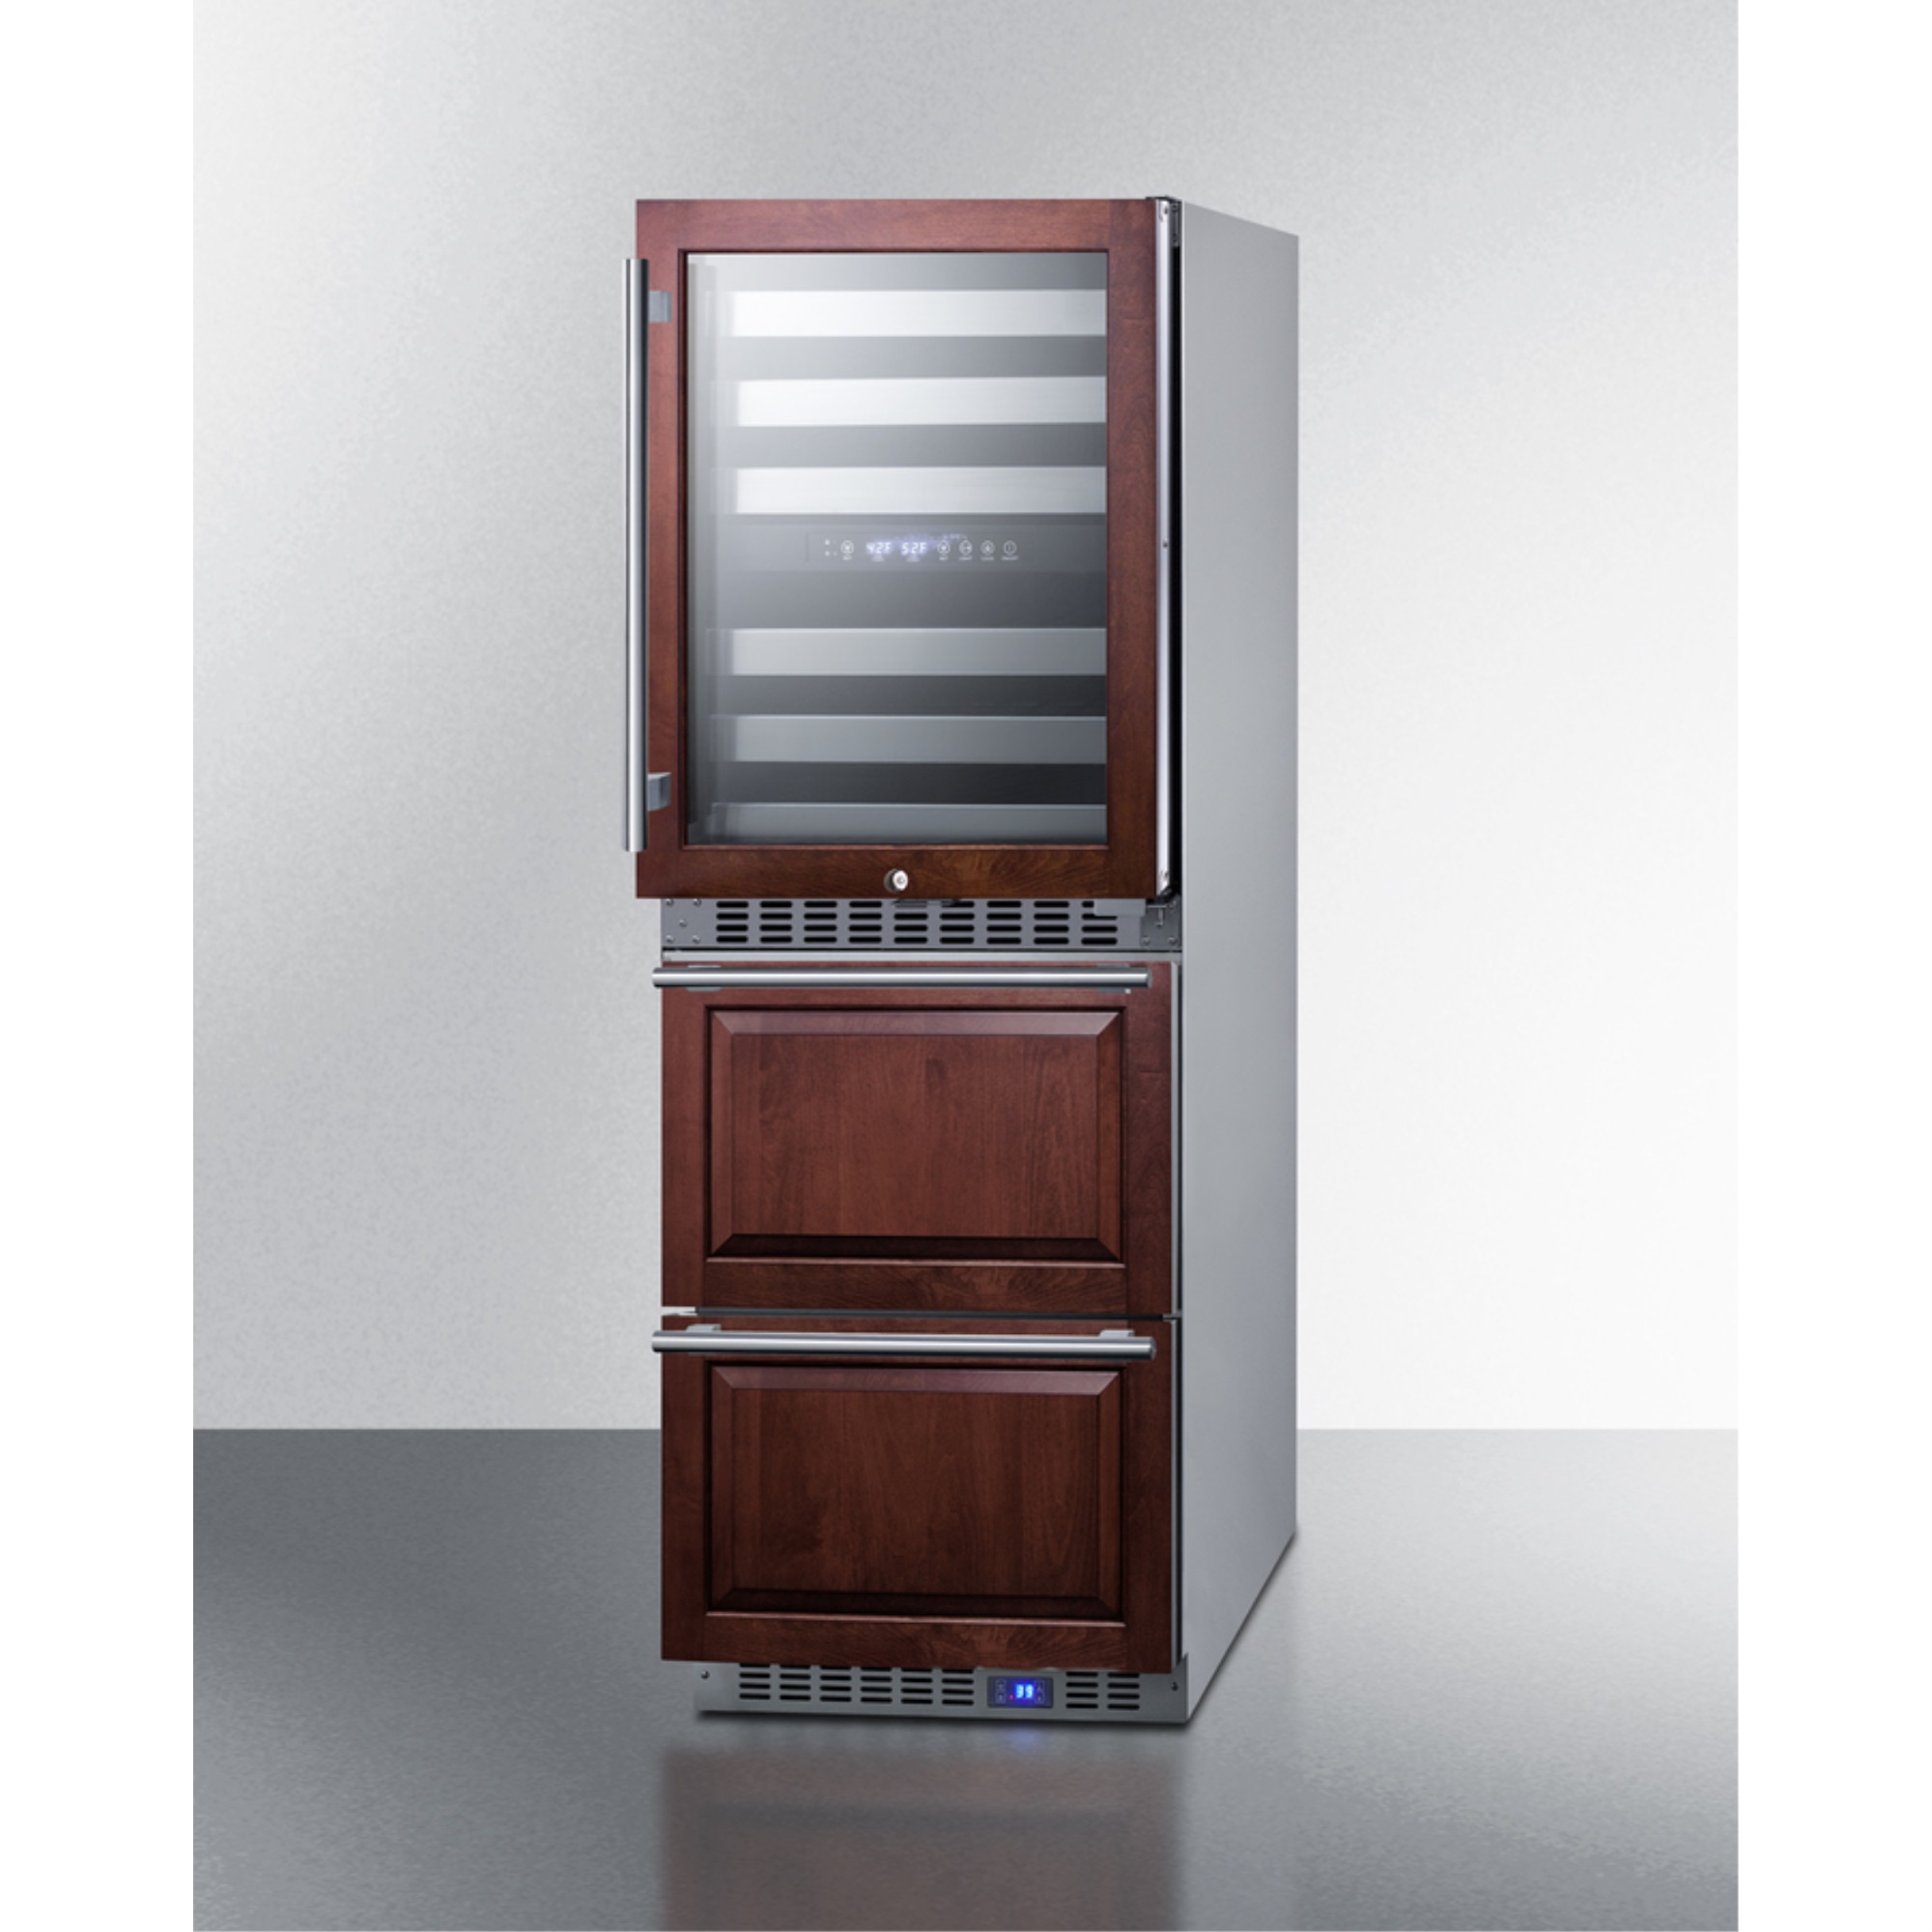 Summit 24" wide combination built-in/freestanding upright dual zone wine cellar and 2-drawer refrigerator, panel-ready front